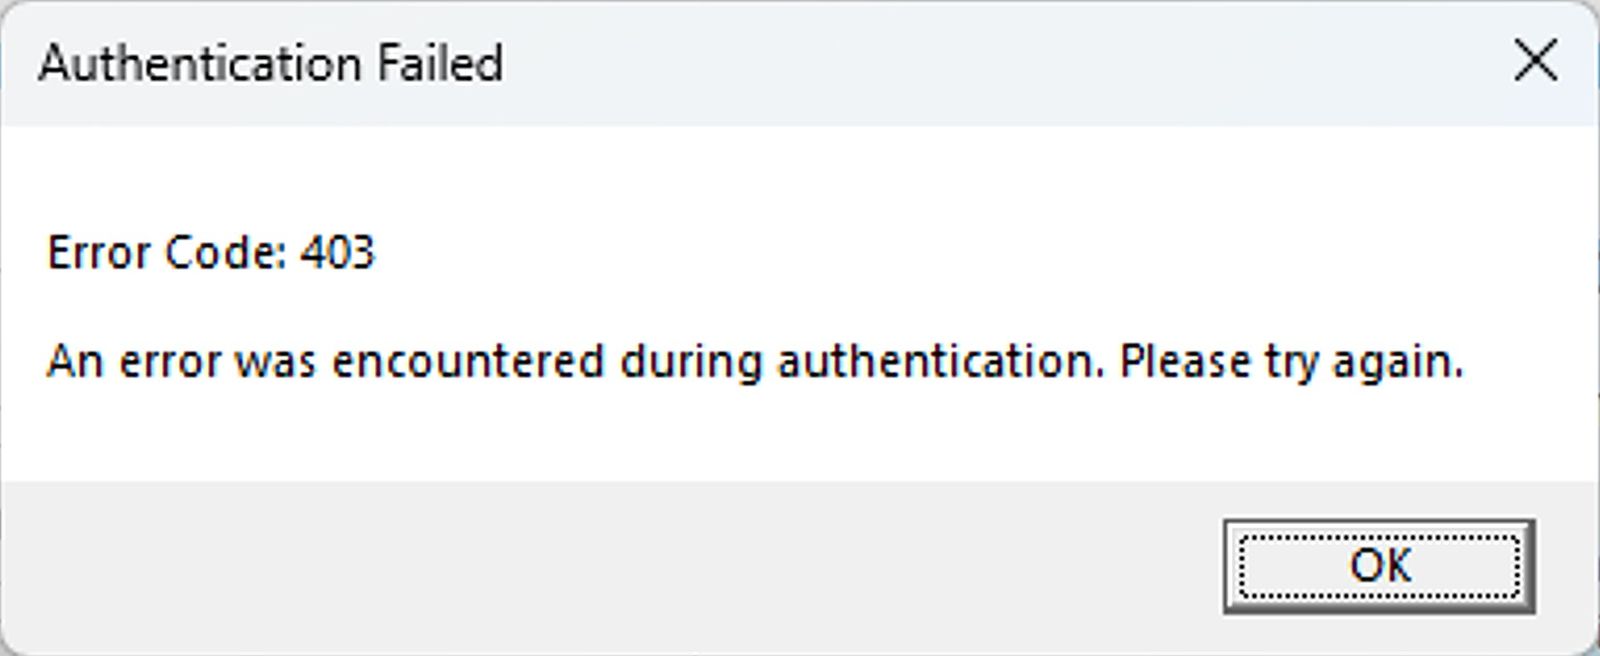 Roblox error code 403 - "An error was encountered during authentication. Please try again."